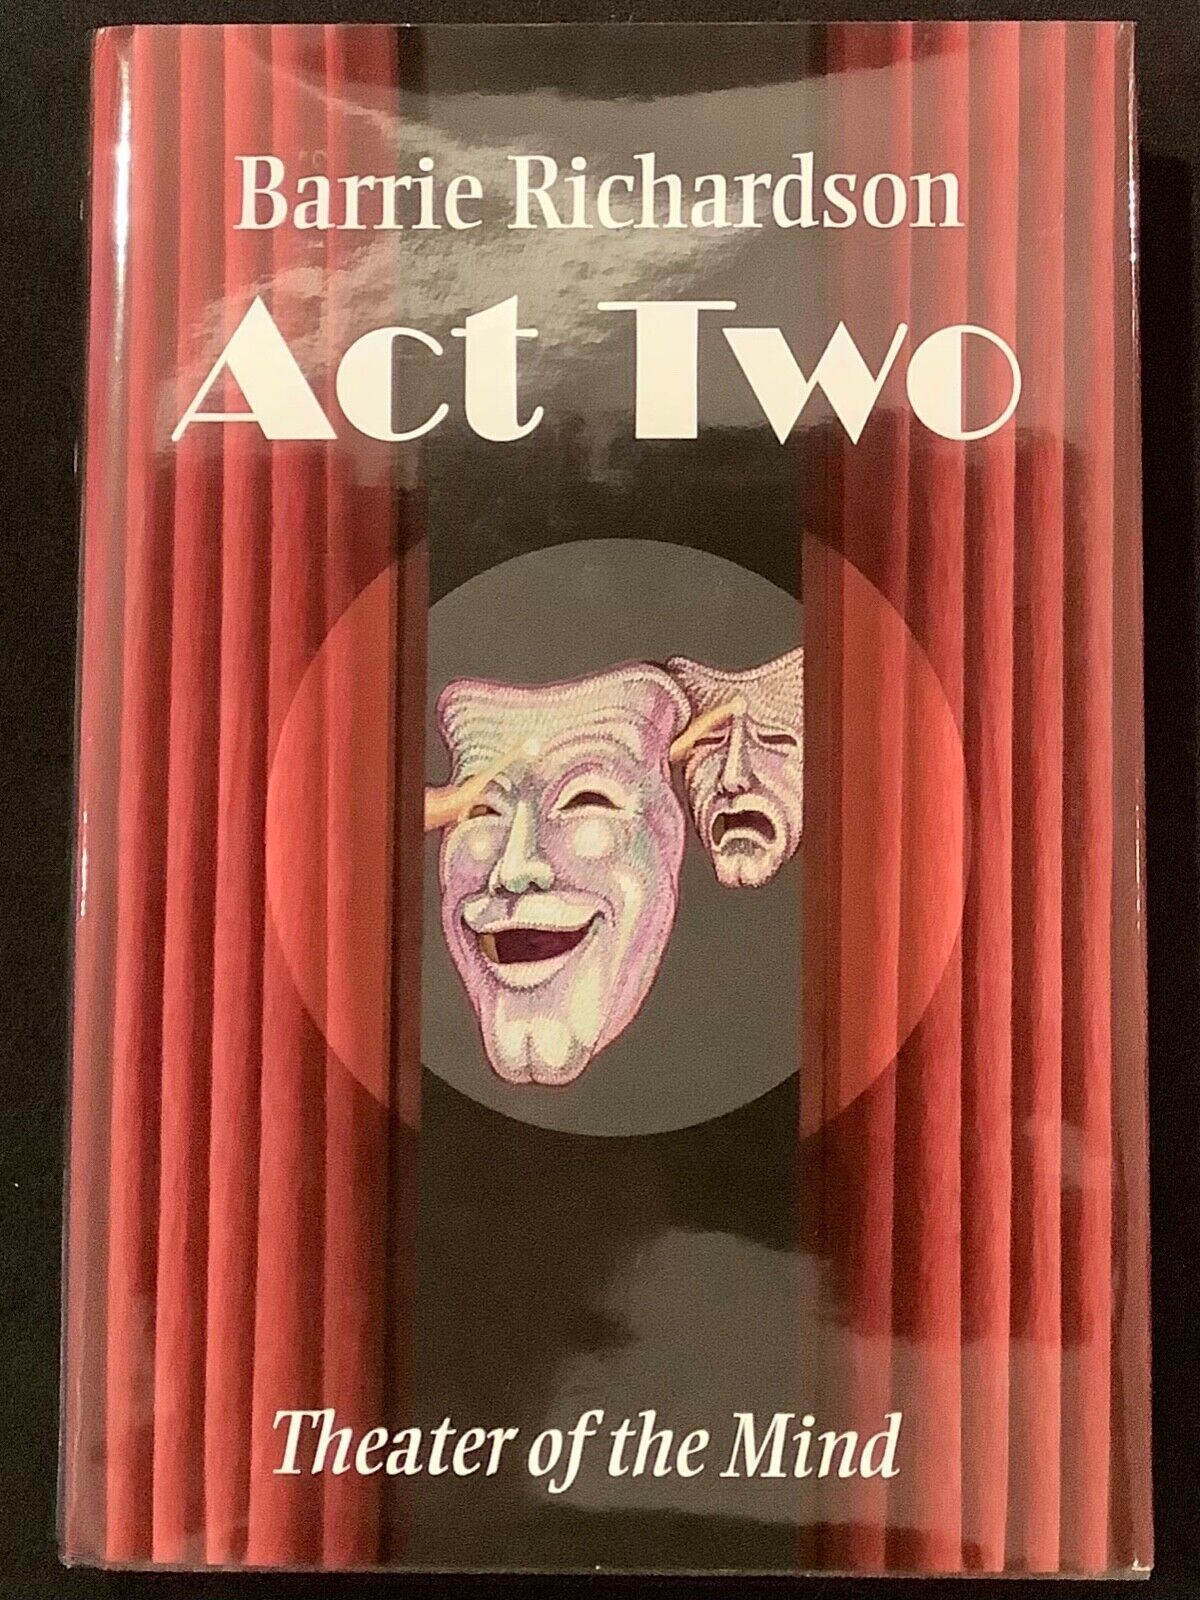  BARRIE RICHARDSON ACT TWO THEATER OF THE MIND BOOK MAGIC MENTALISM THEATRE 